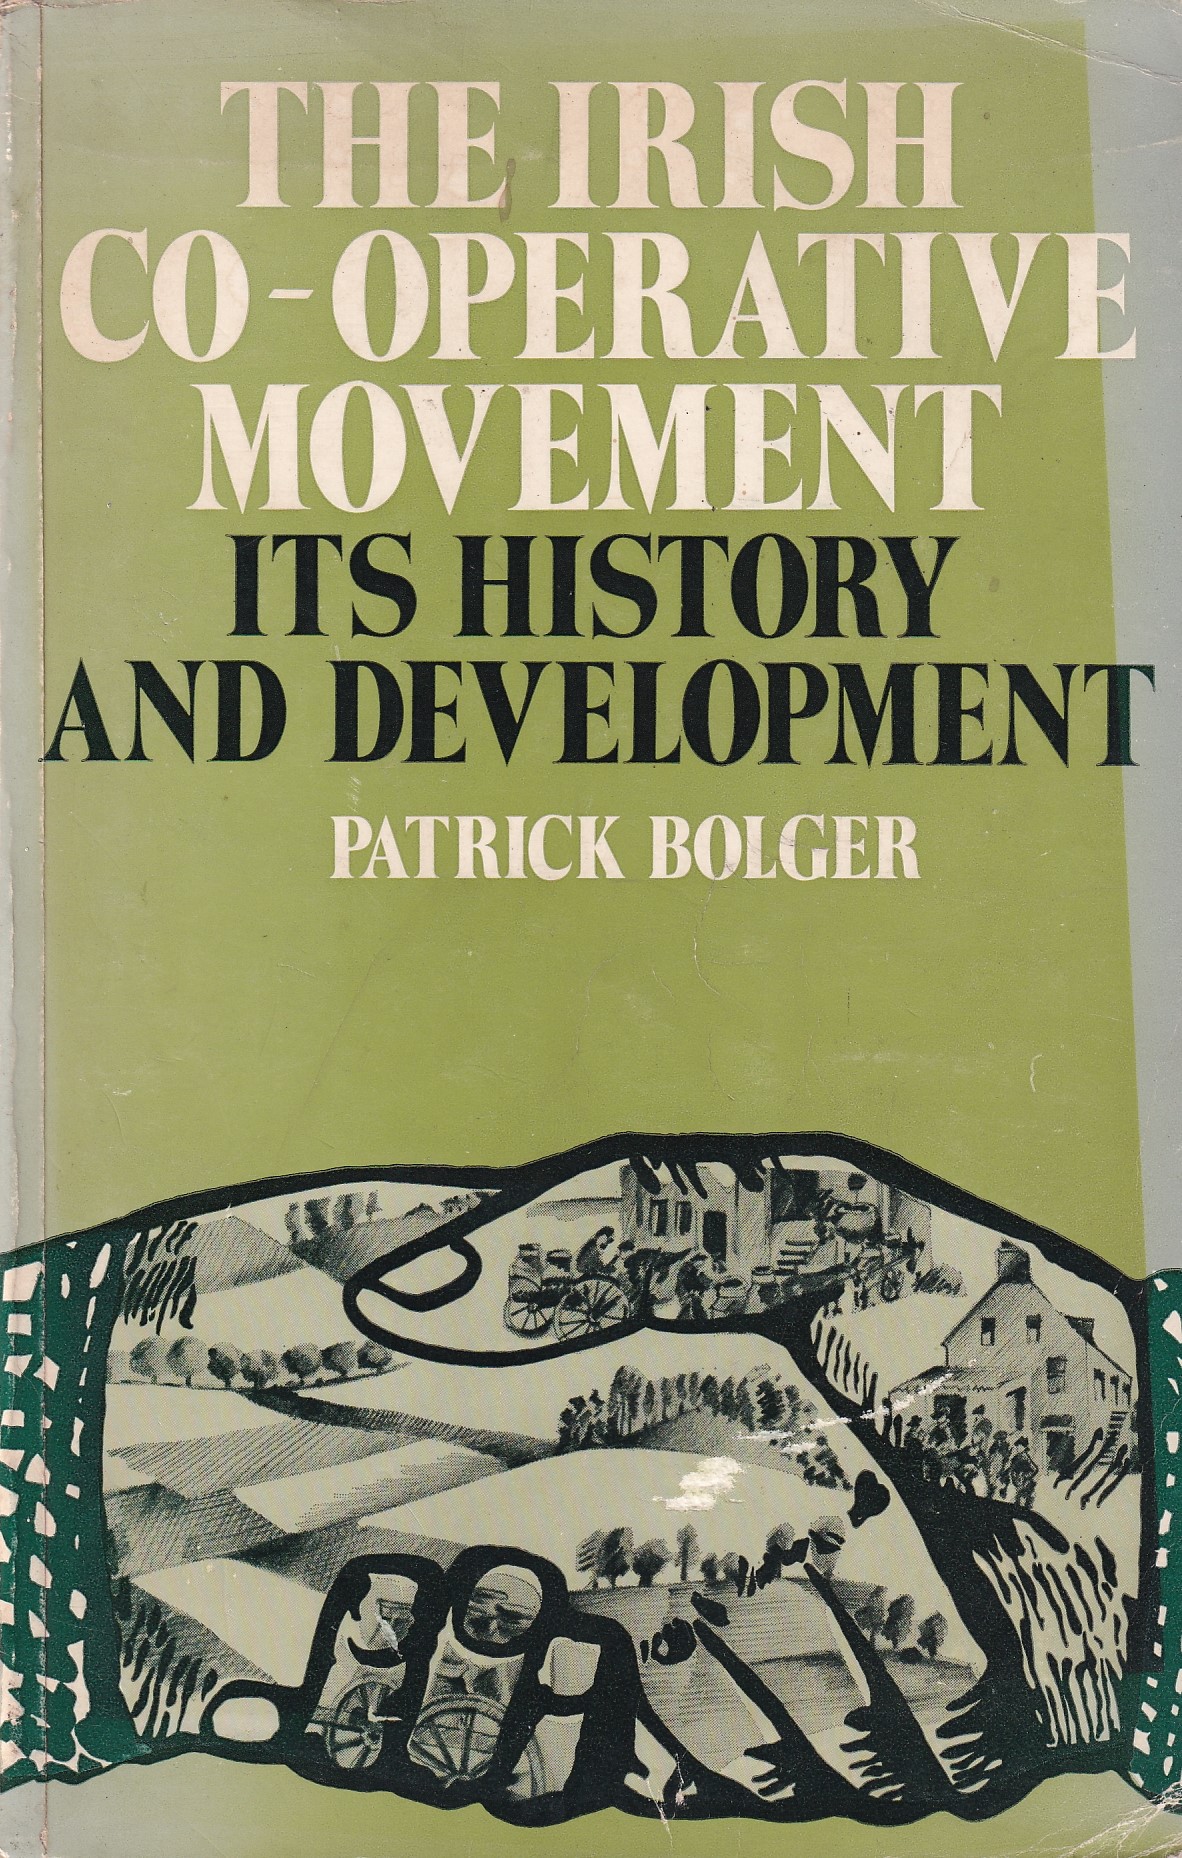 The Irish Cooperative Movement: Its History and Development | Patrick Bolger | Charlie Byrne's